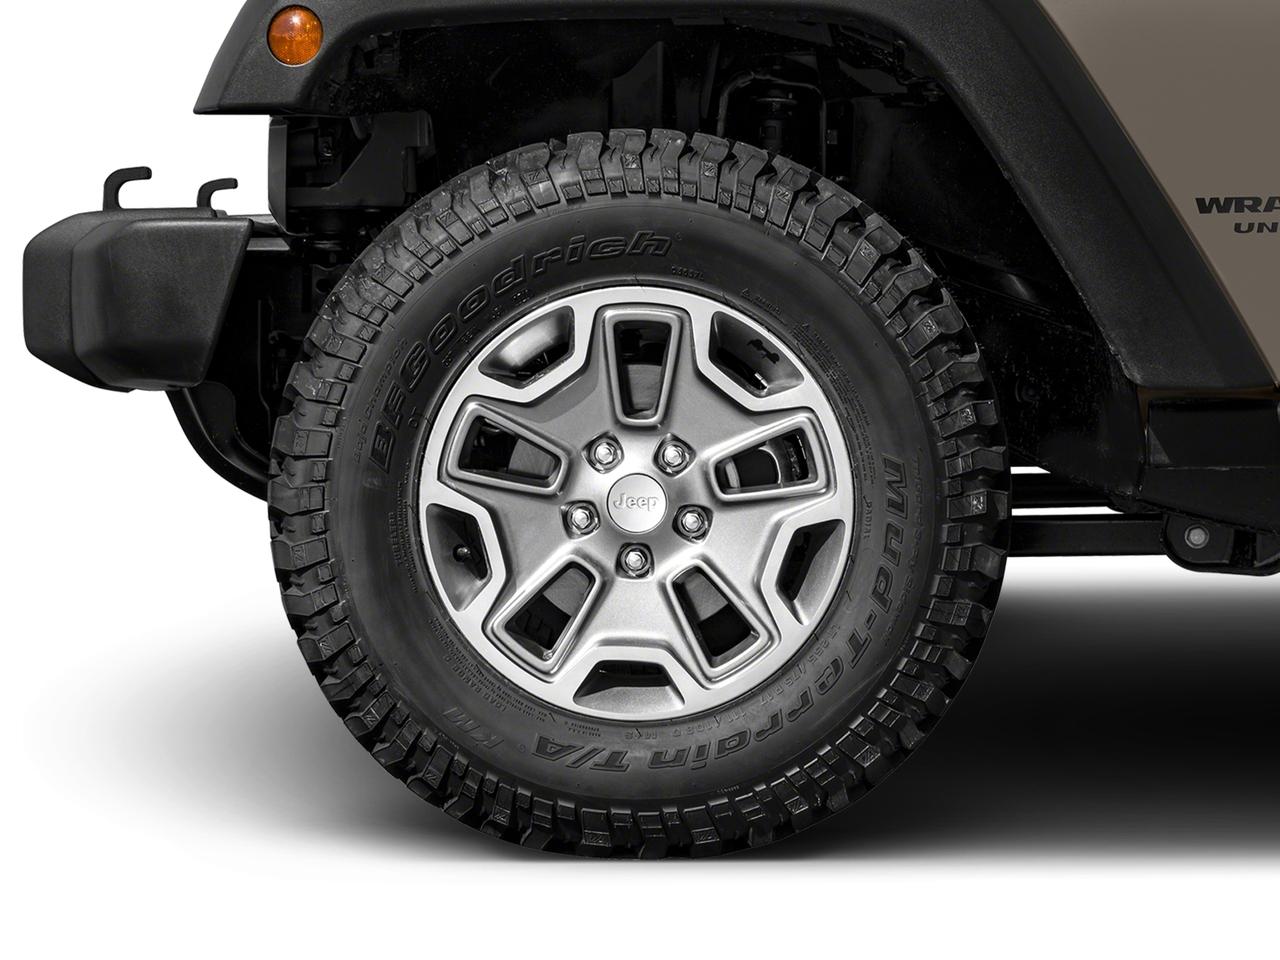 2016 Jeep Wrangler Unlimited Vehicle Photo in Pembroke Pines, FL 33027